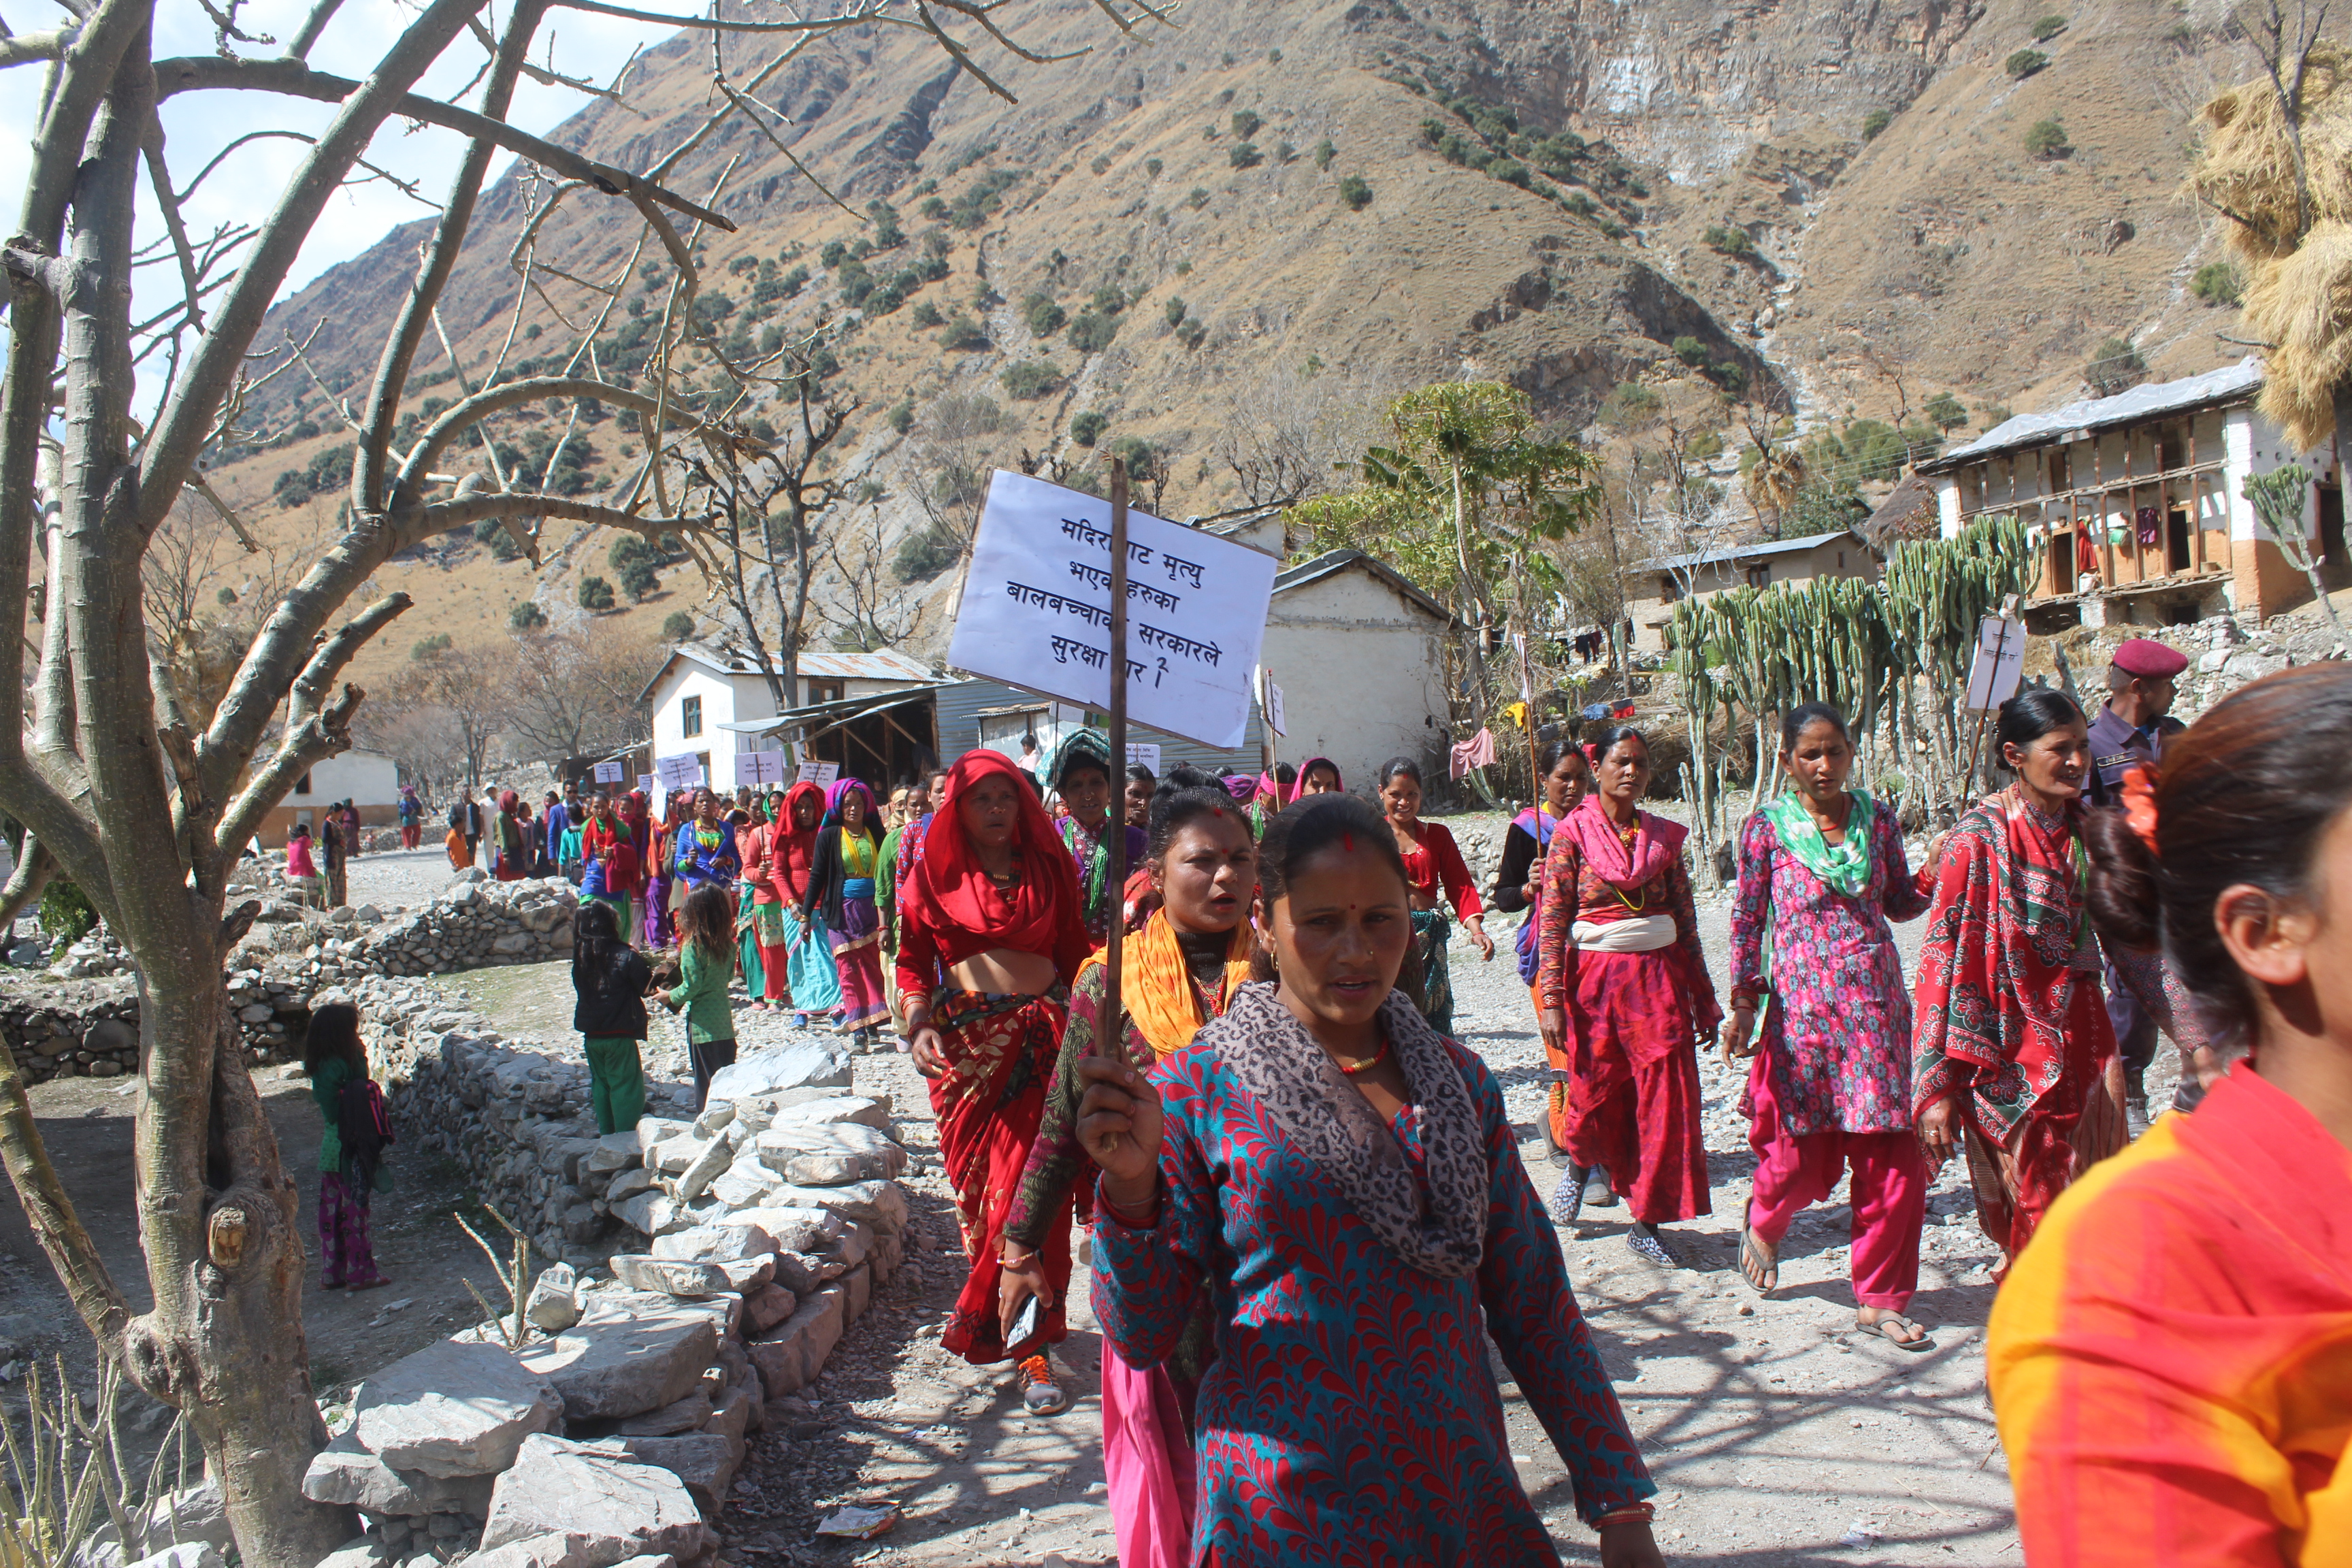 Local women take part in a protest rally against alcohol abuse on Sunday, March 10, 2019. Photo: Prakash Singh/THT